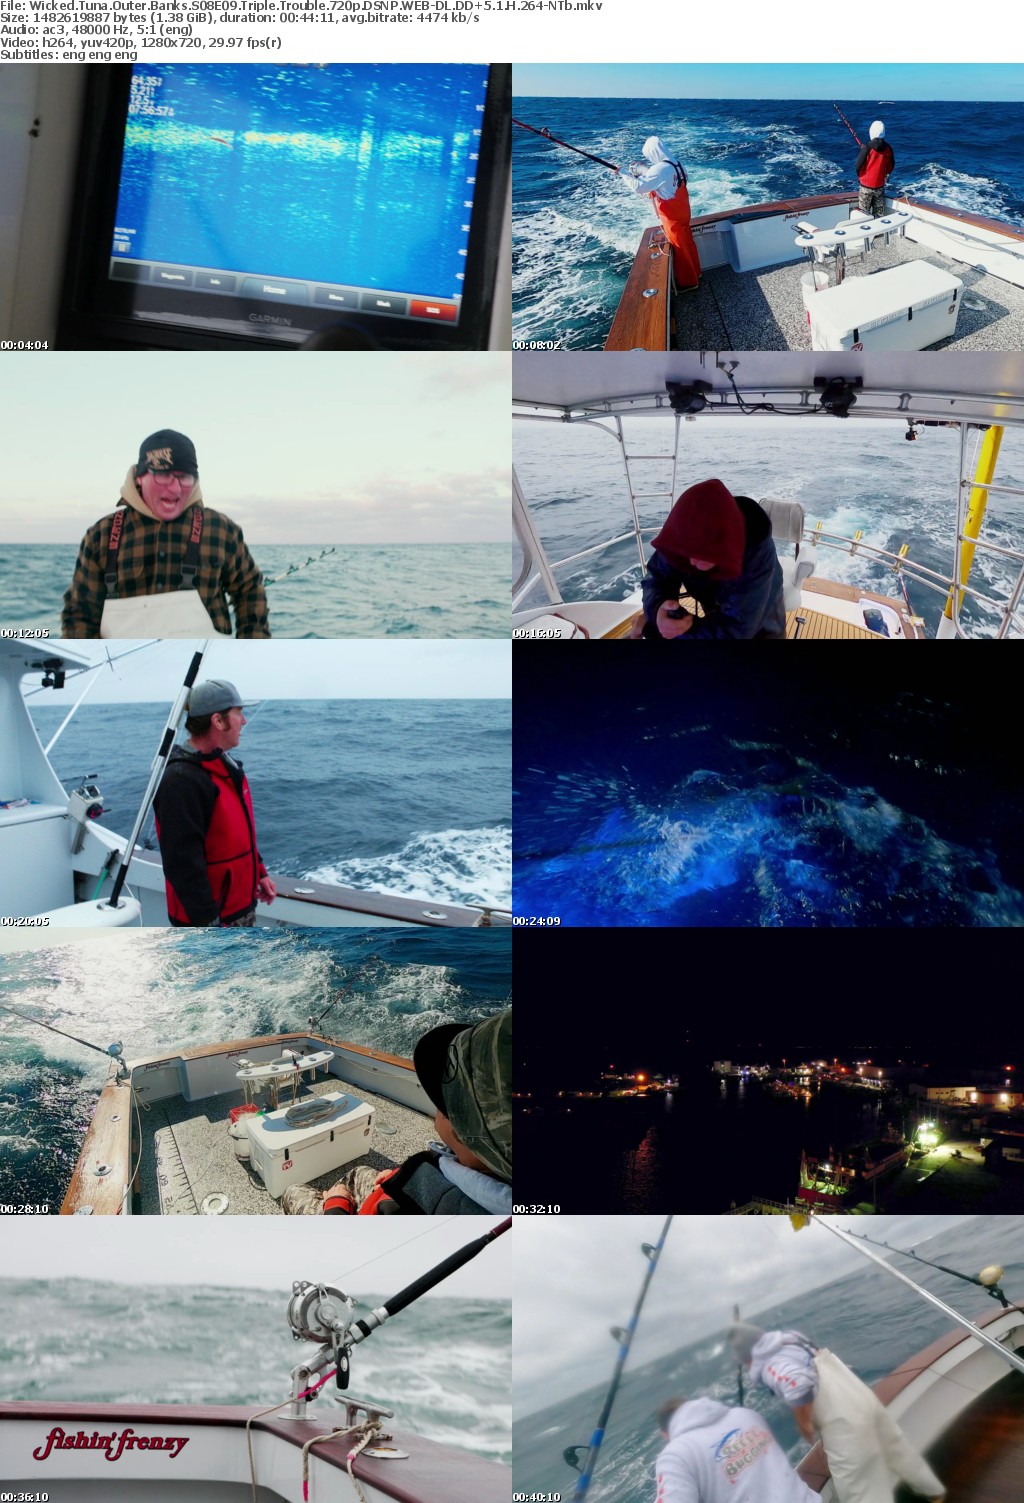 Wicked Tuna Outer Banks S08E09 Triple Trouble 720p DSNP WEBRip DDP5 1 x264-NTb